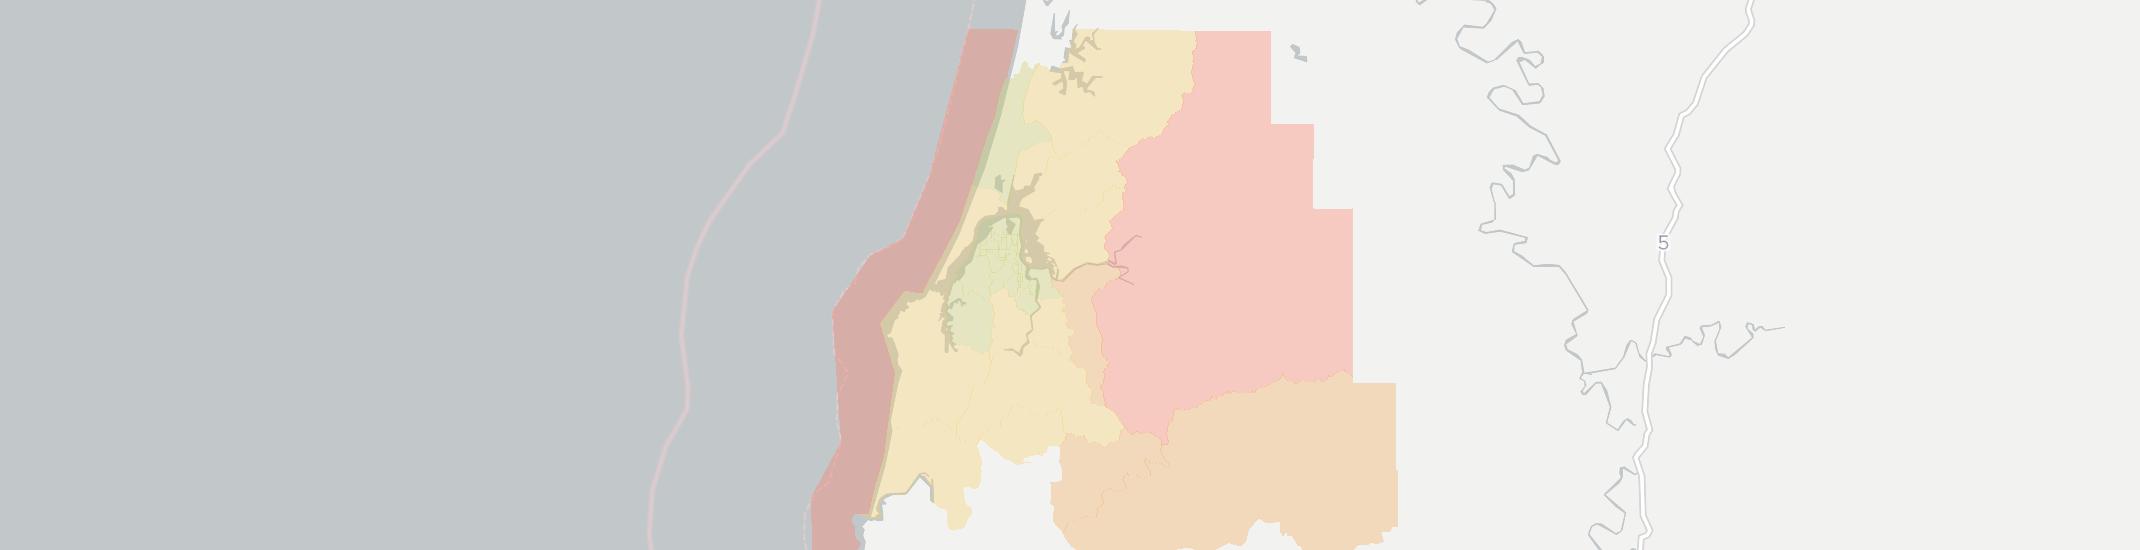 Coos Bay Internet Competition Map. Click for interactive map.